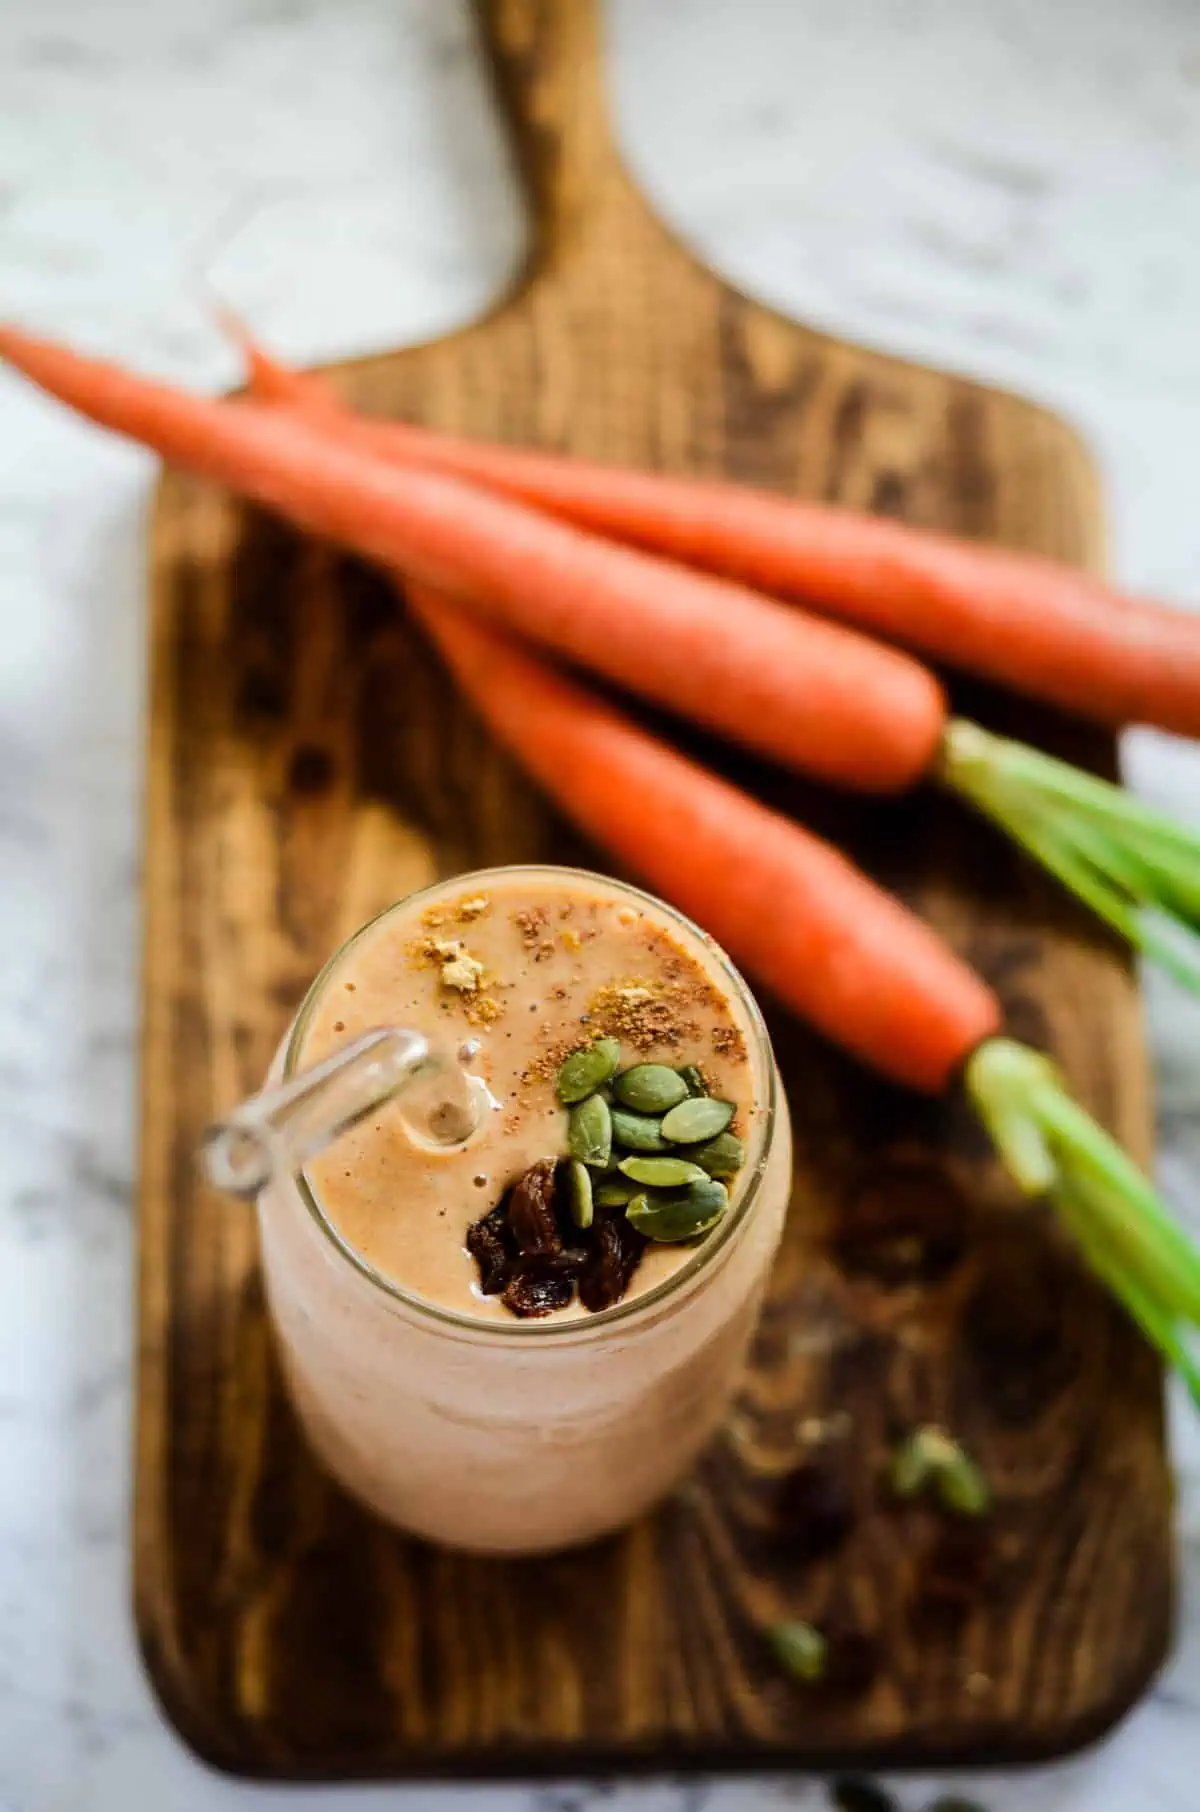 A bird's eye view of a carrot cake smoothie in glass cup with a glass straw on a wooden cutting board with three raw carrots in the background.